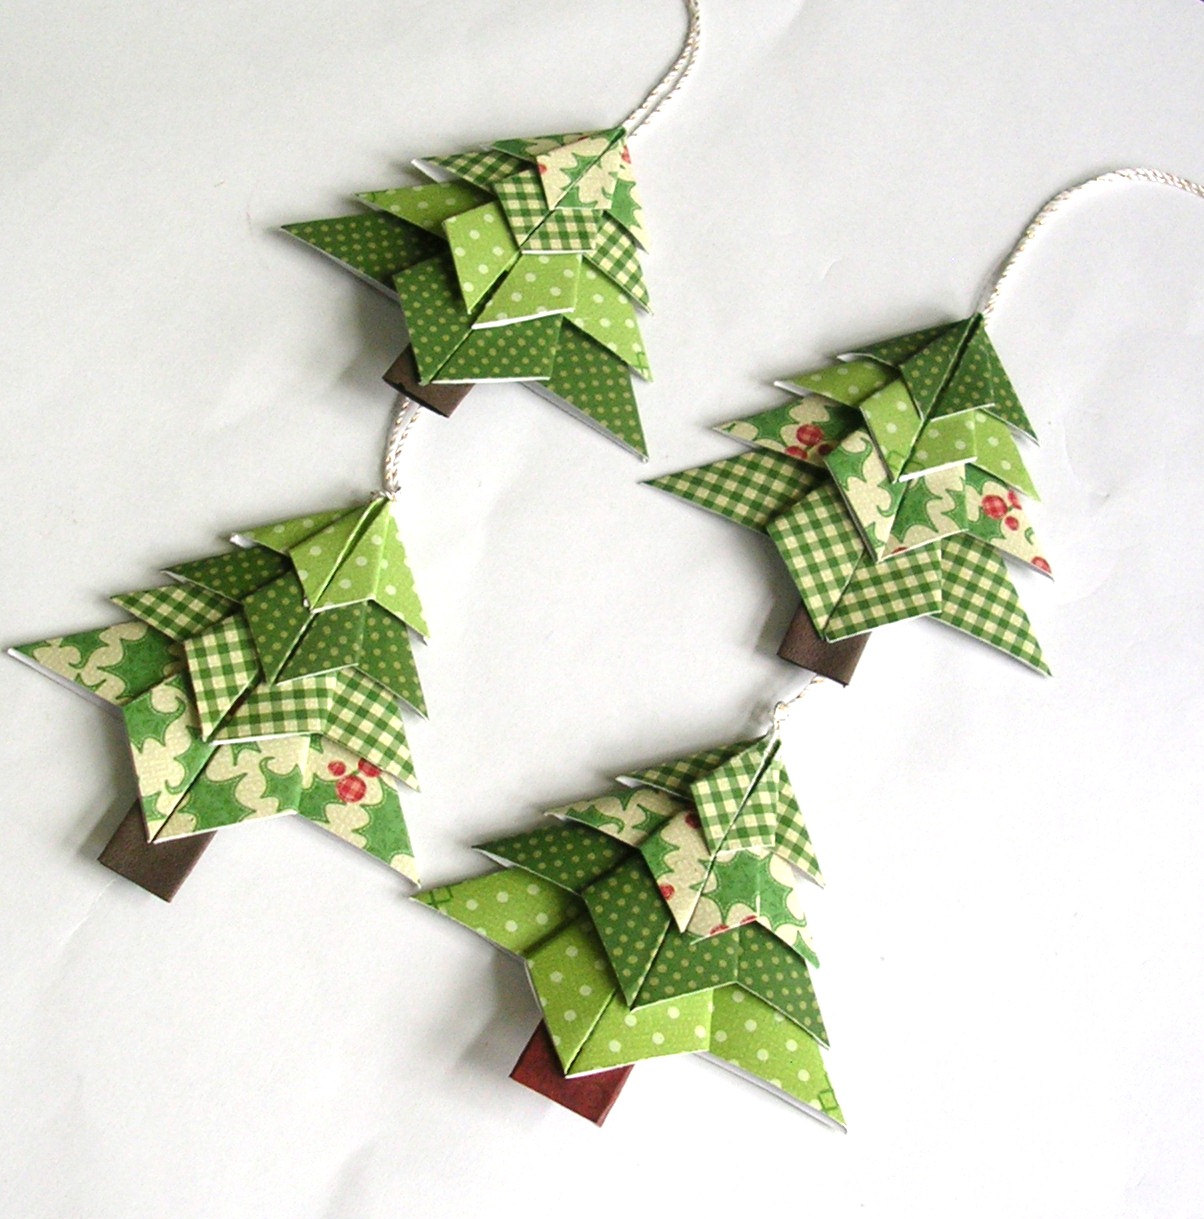 Neat Origami Christmas Decorations 2016